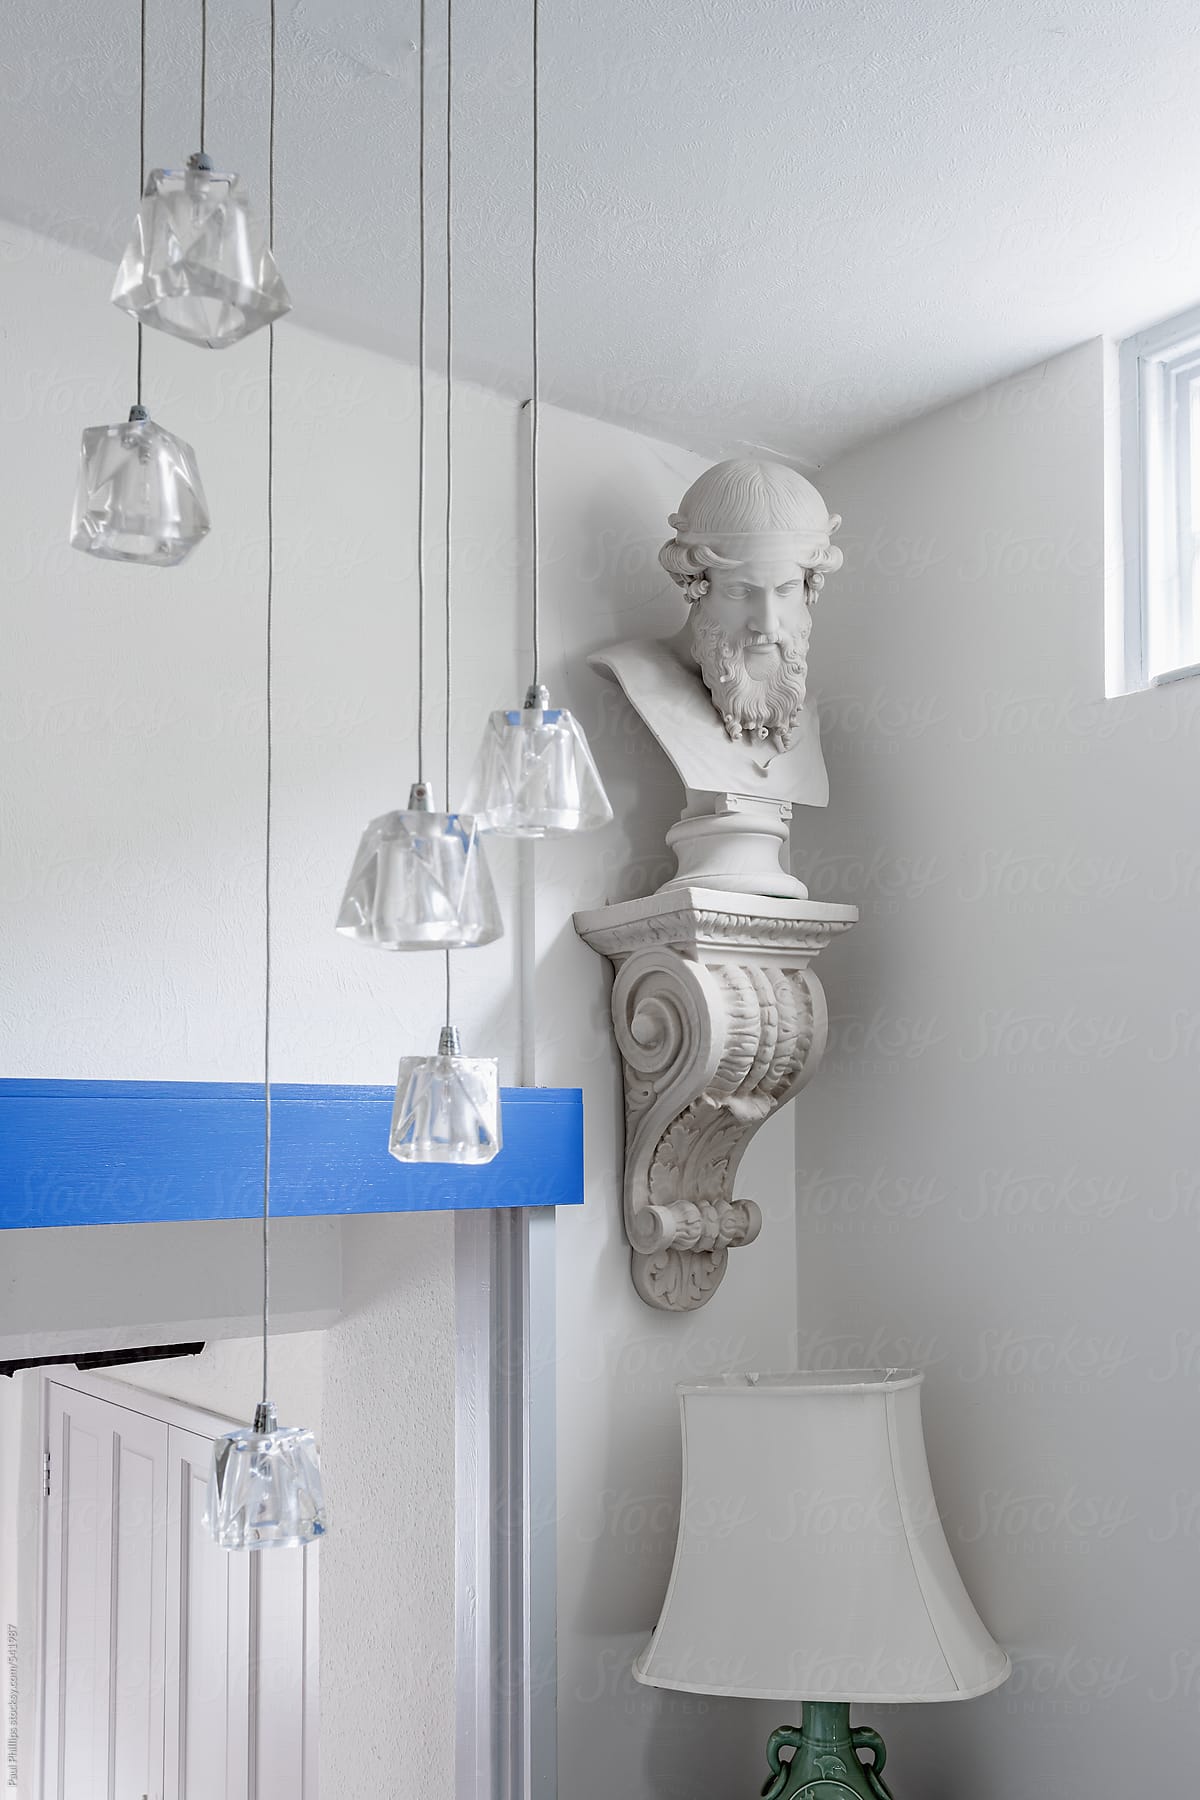 Corner of a white room with a wall statue and hanging in the corner